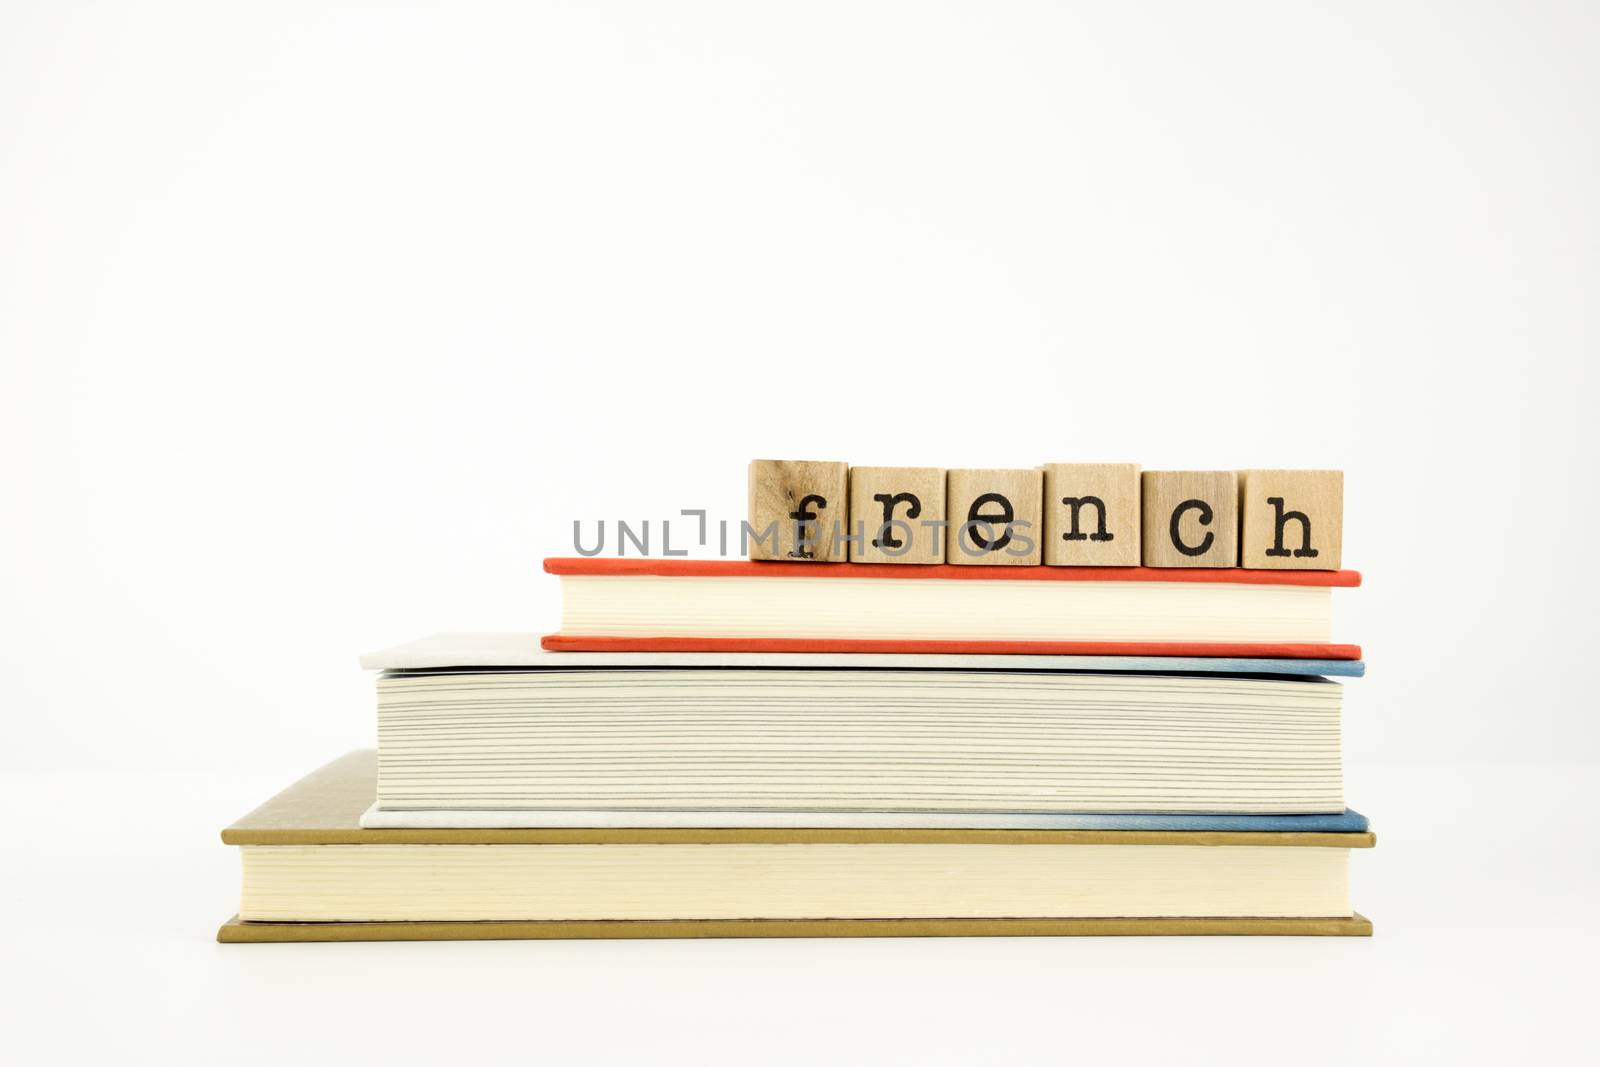 french language word on wood stamps and books by vinnstock